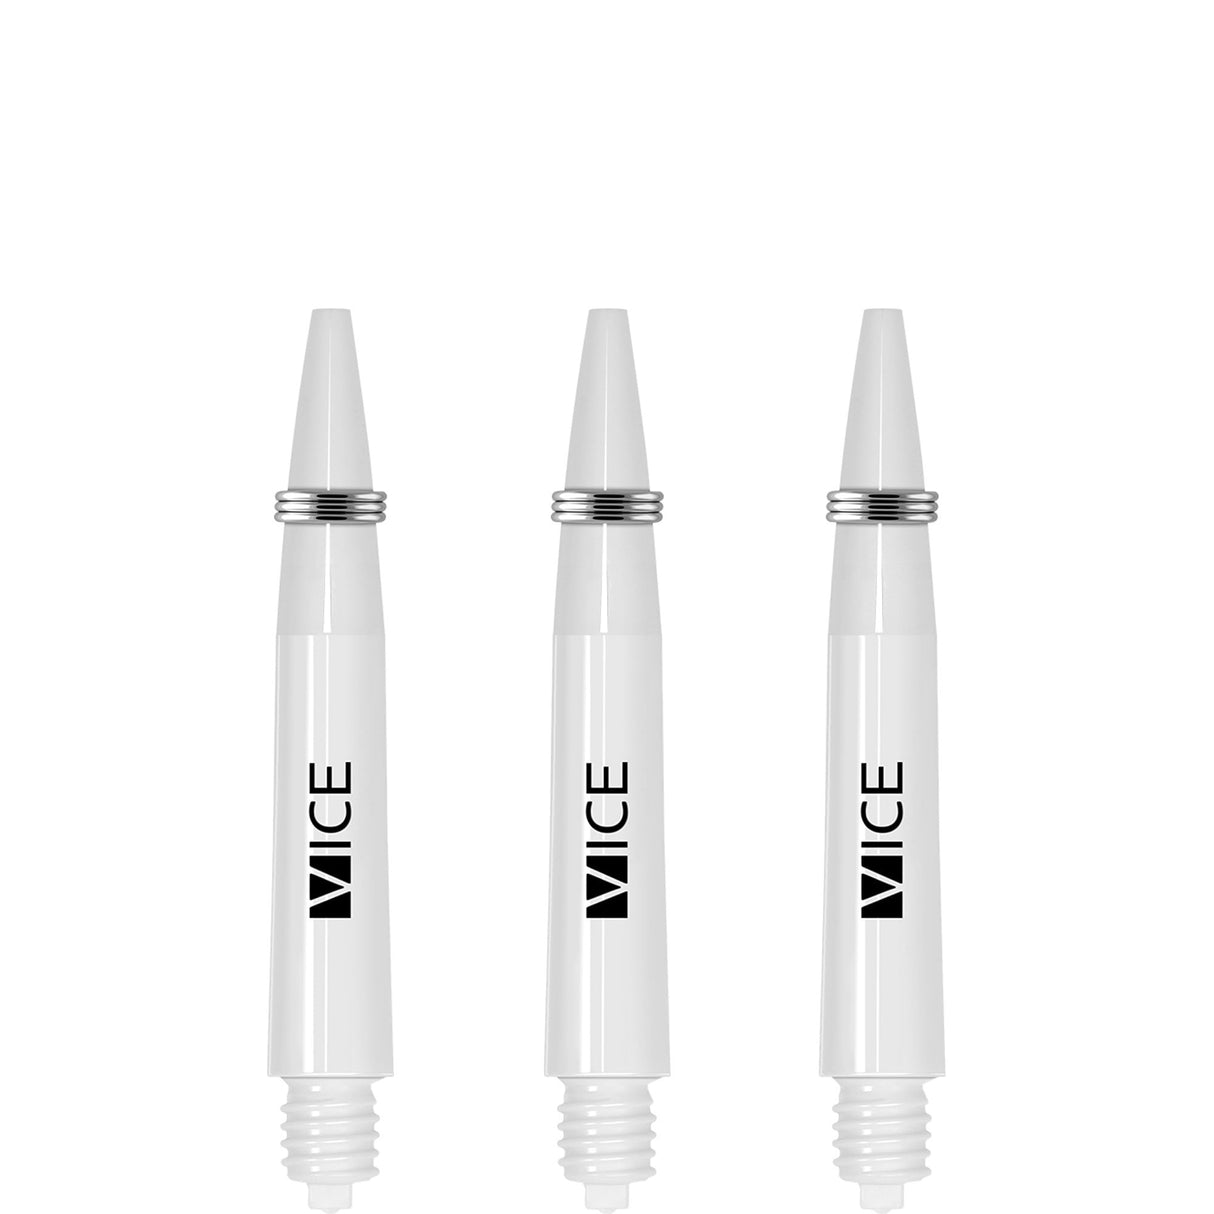 One80 Vice Shafts - Stems with Springs - White Short